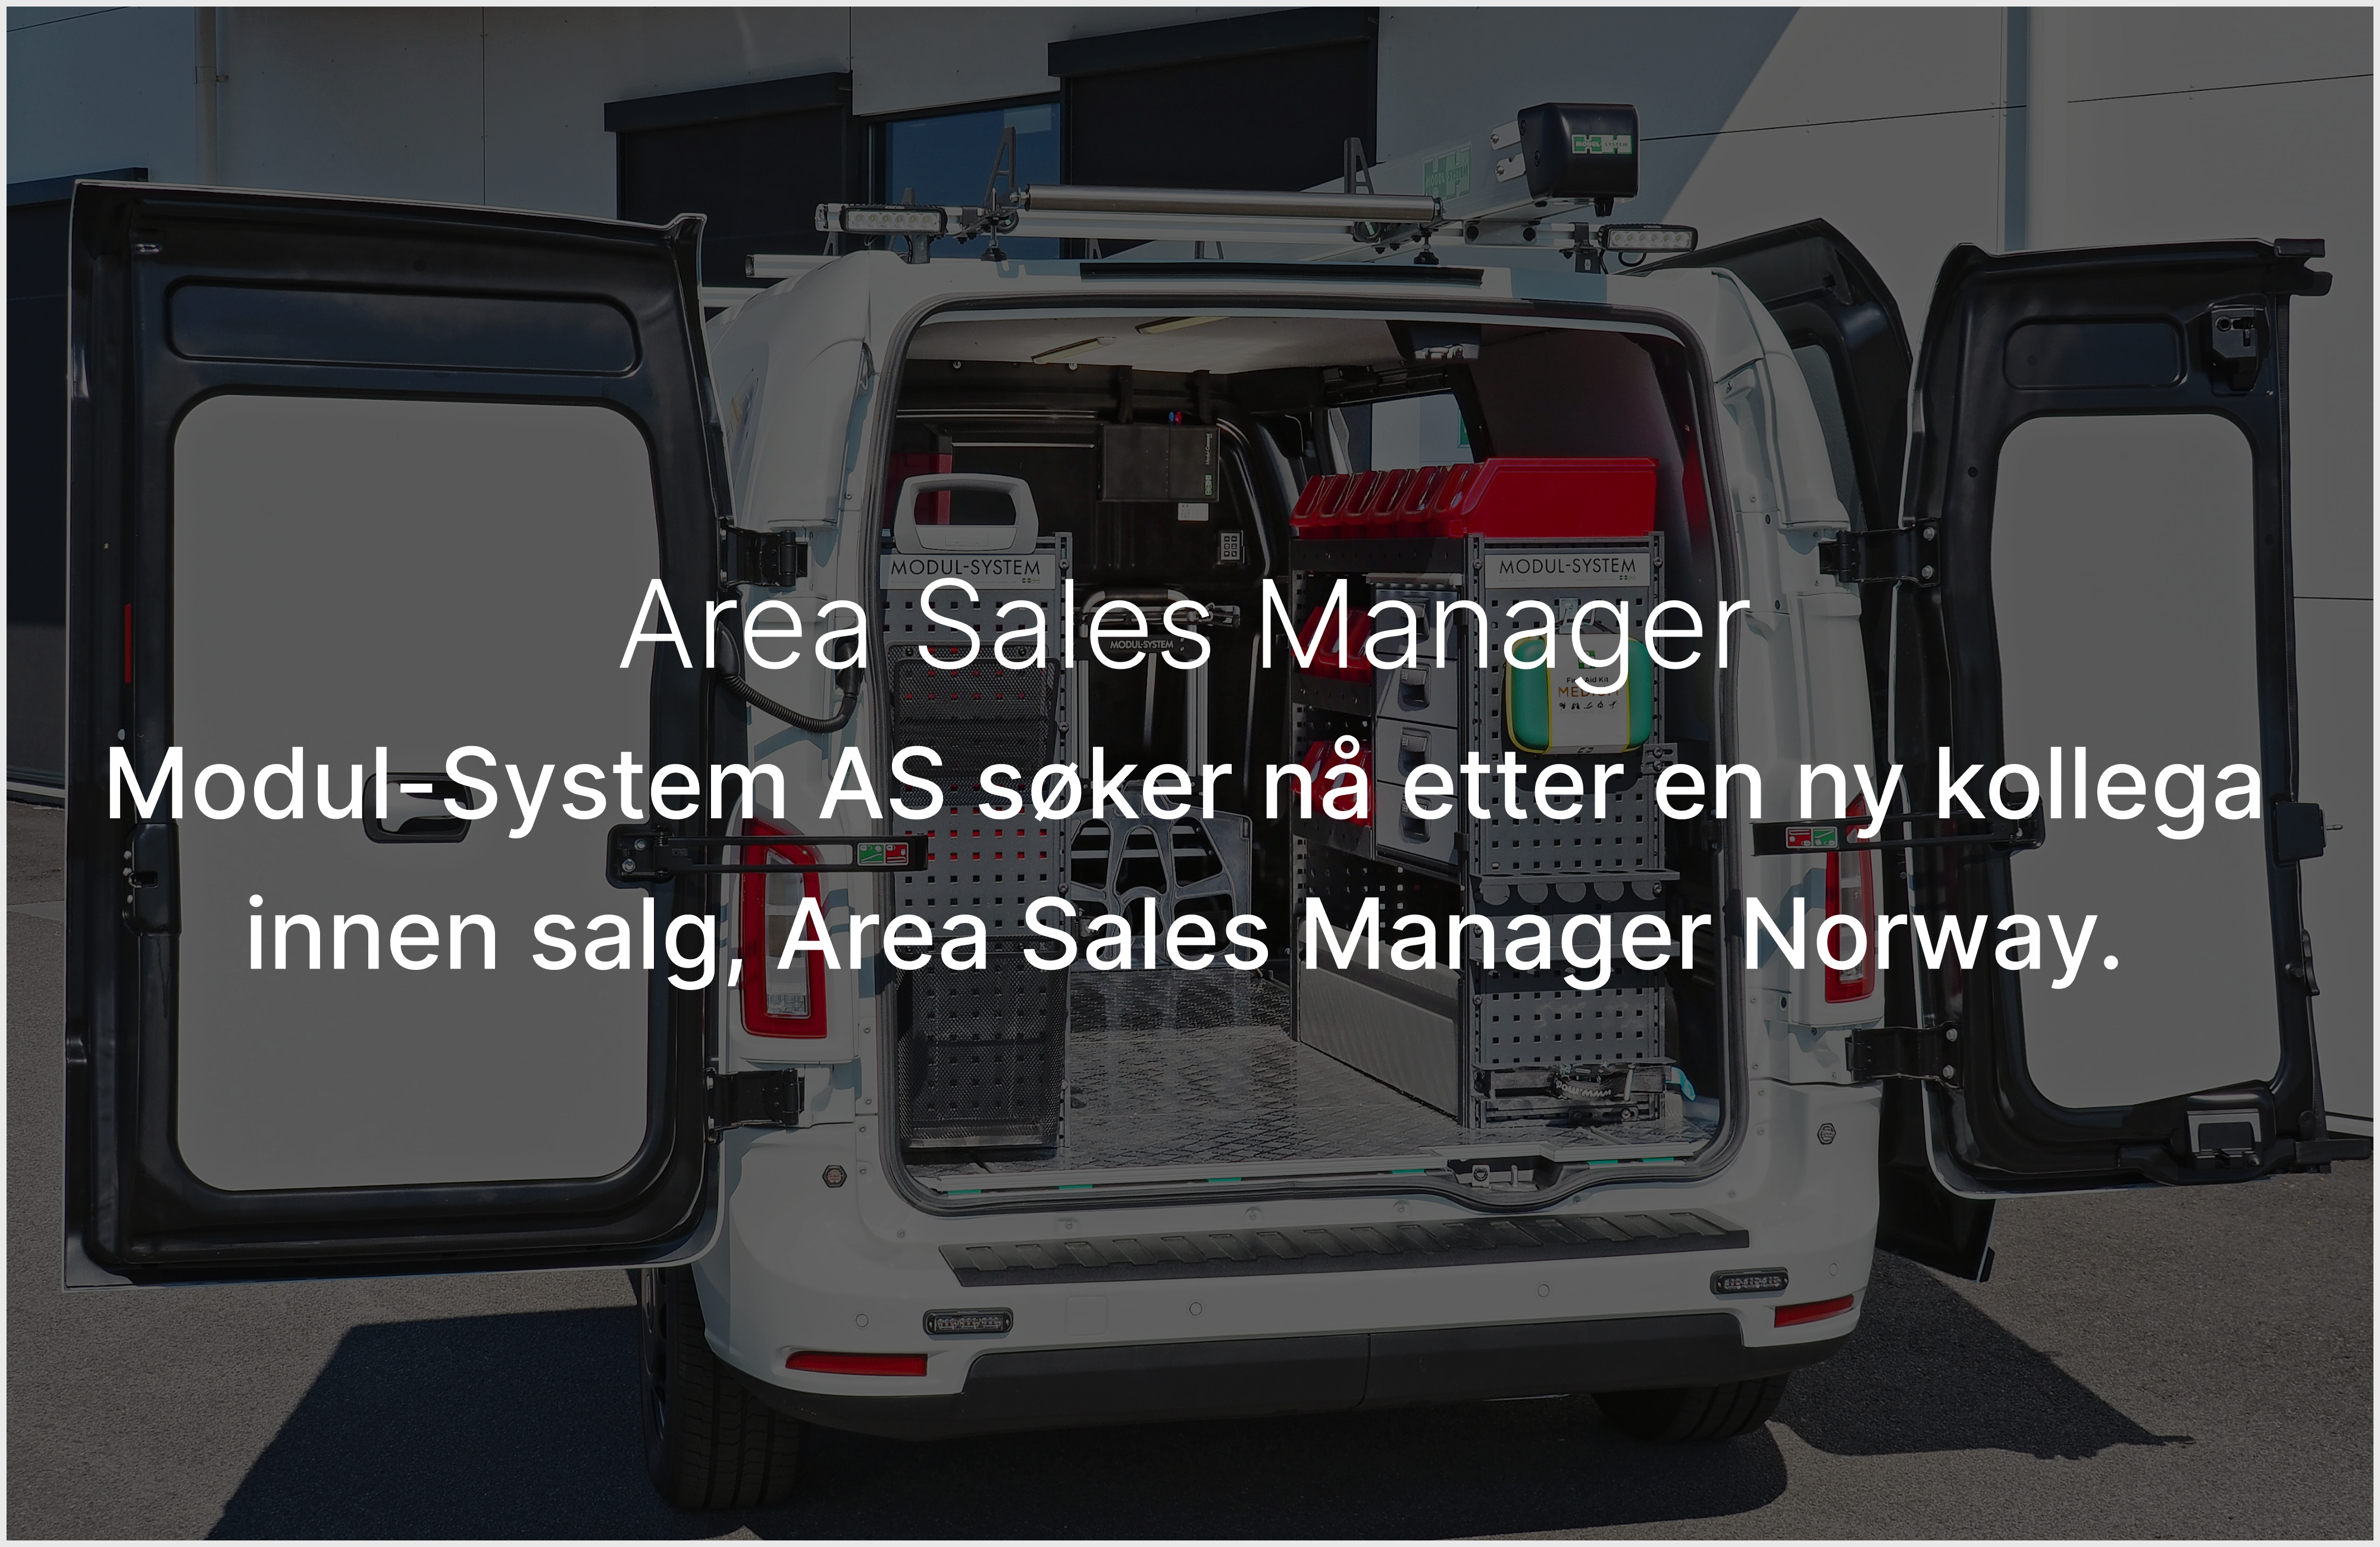 Area Sales Manager Norway